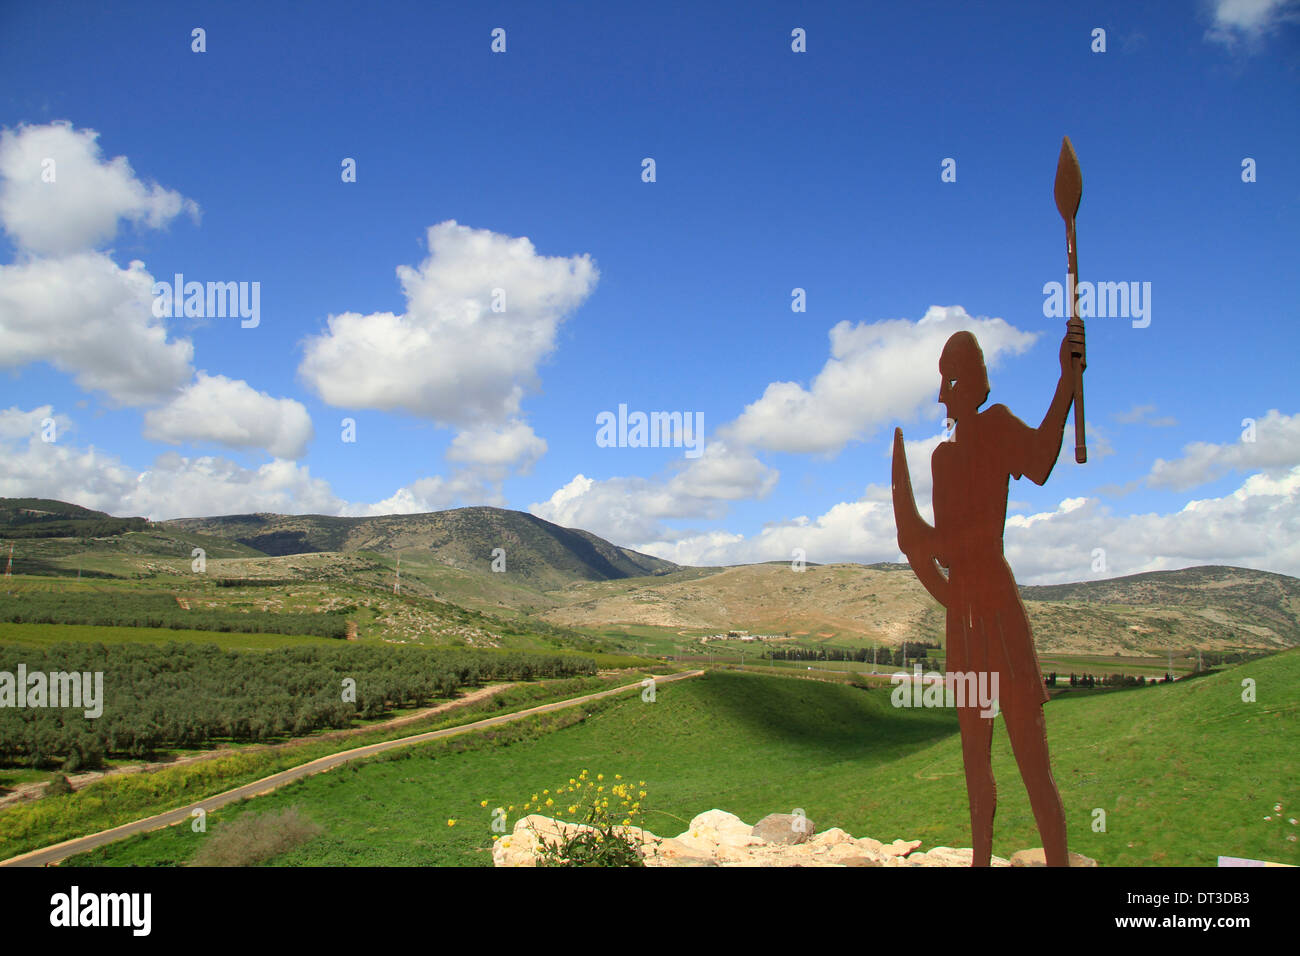 Israel, Tel Hazor in the Galilee, site of the biblical city Hazor overlooking the Hula valley Stock Photo